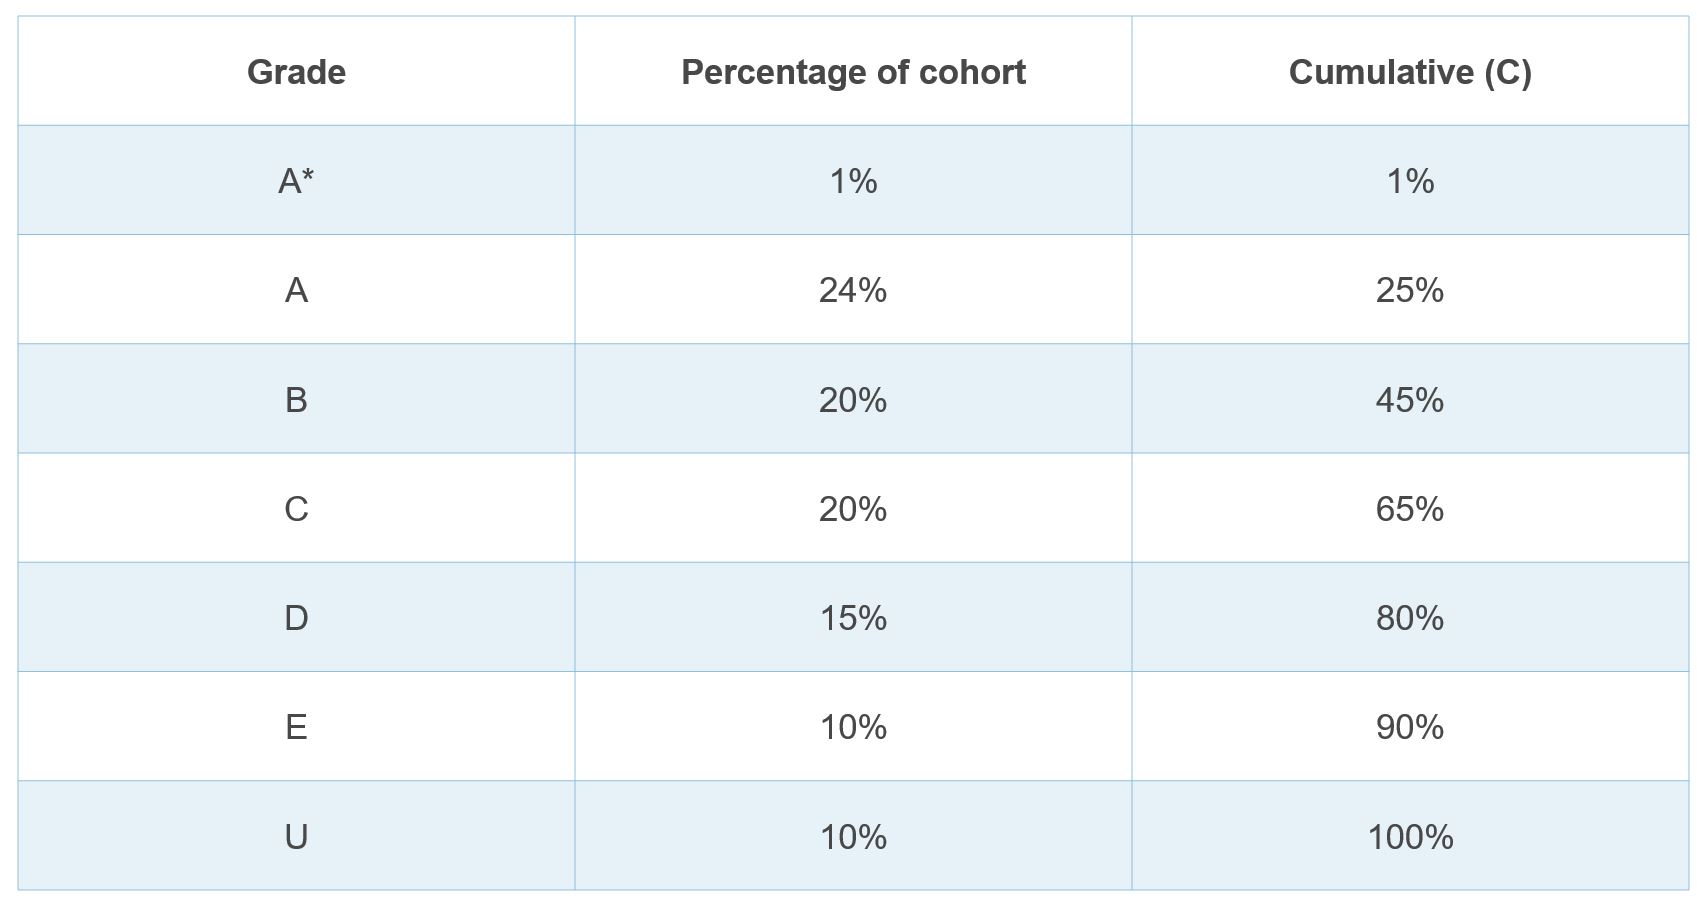 Table showing percentage of cohort by grade